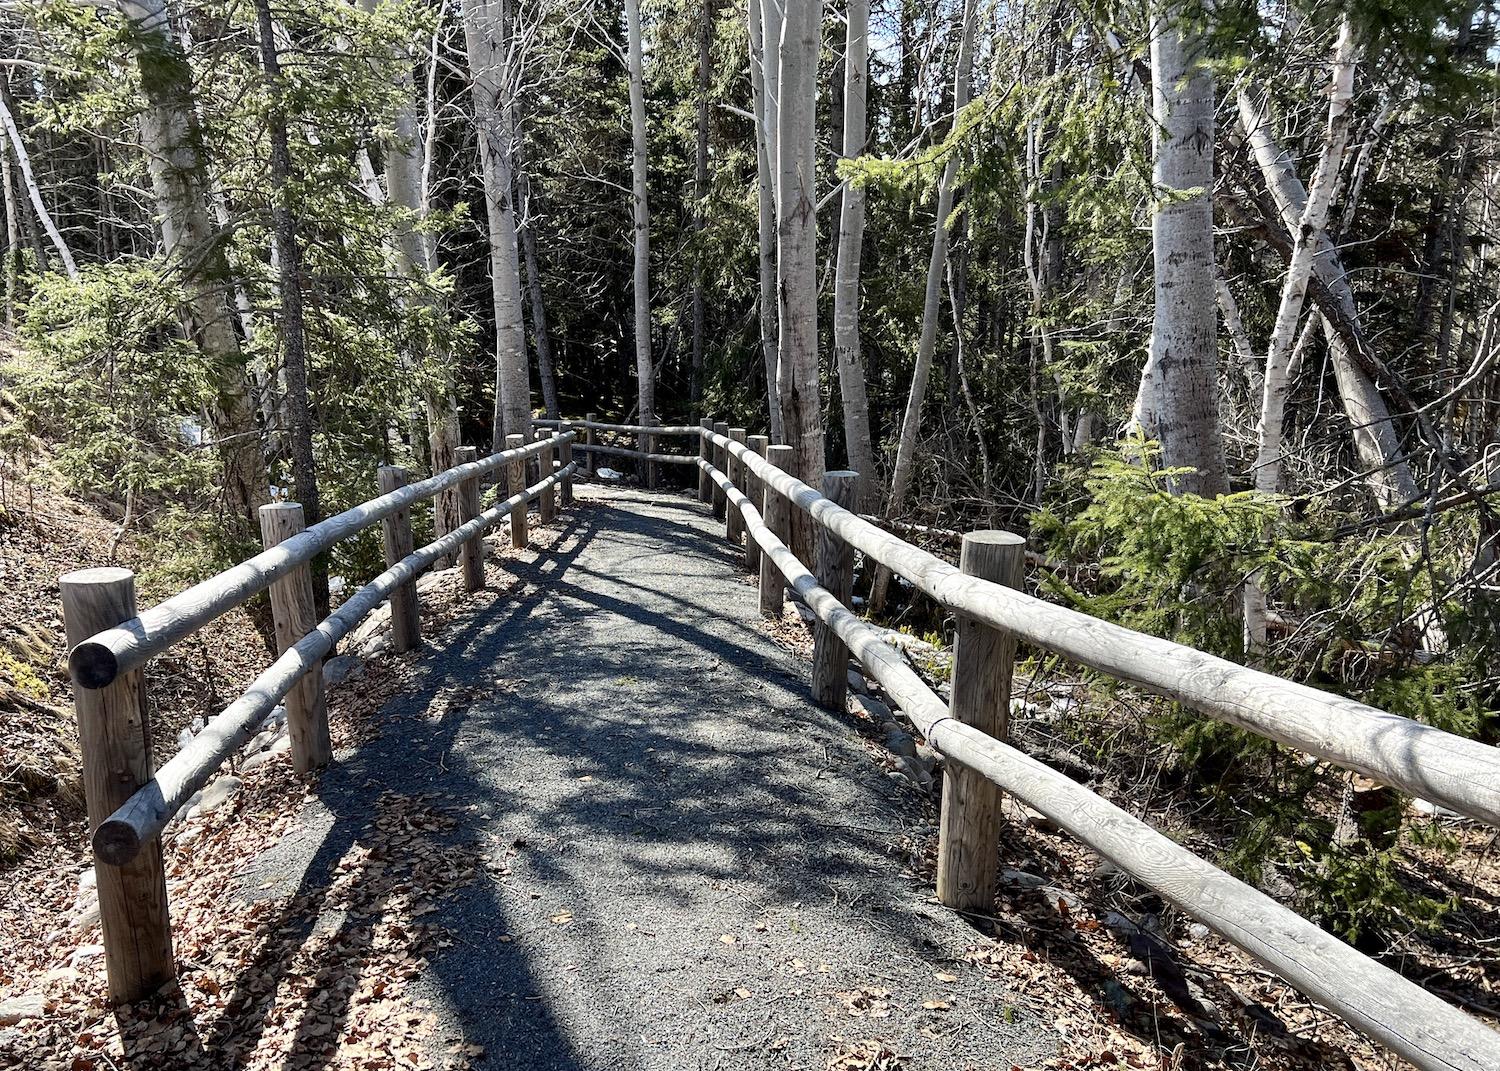 The Salmon River Walking Trail is wheelchair accessible and has gentle slopes.